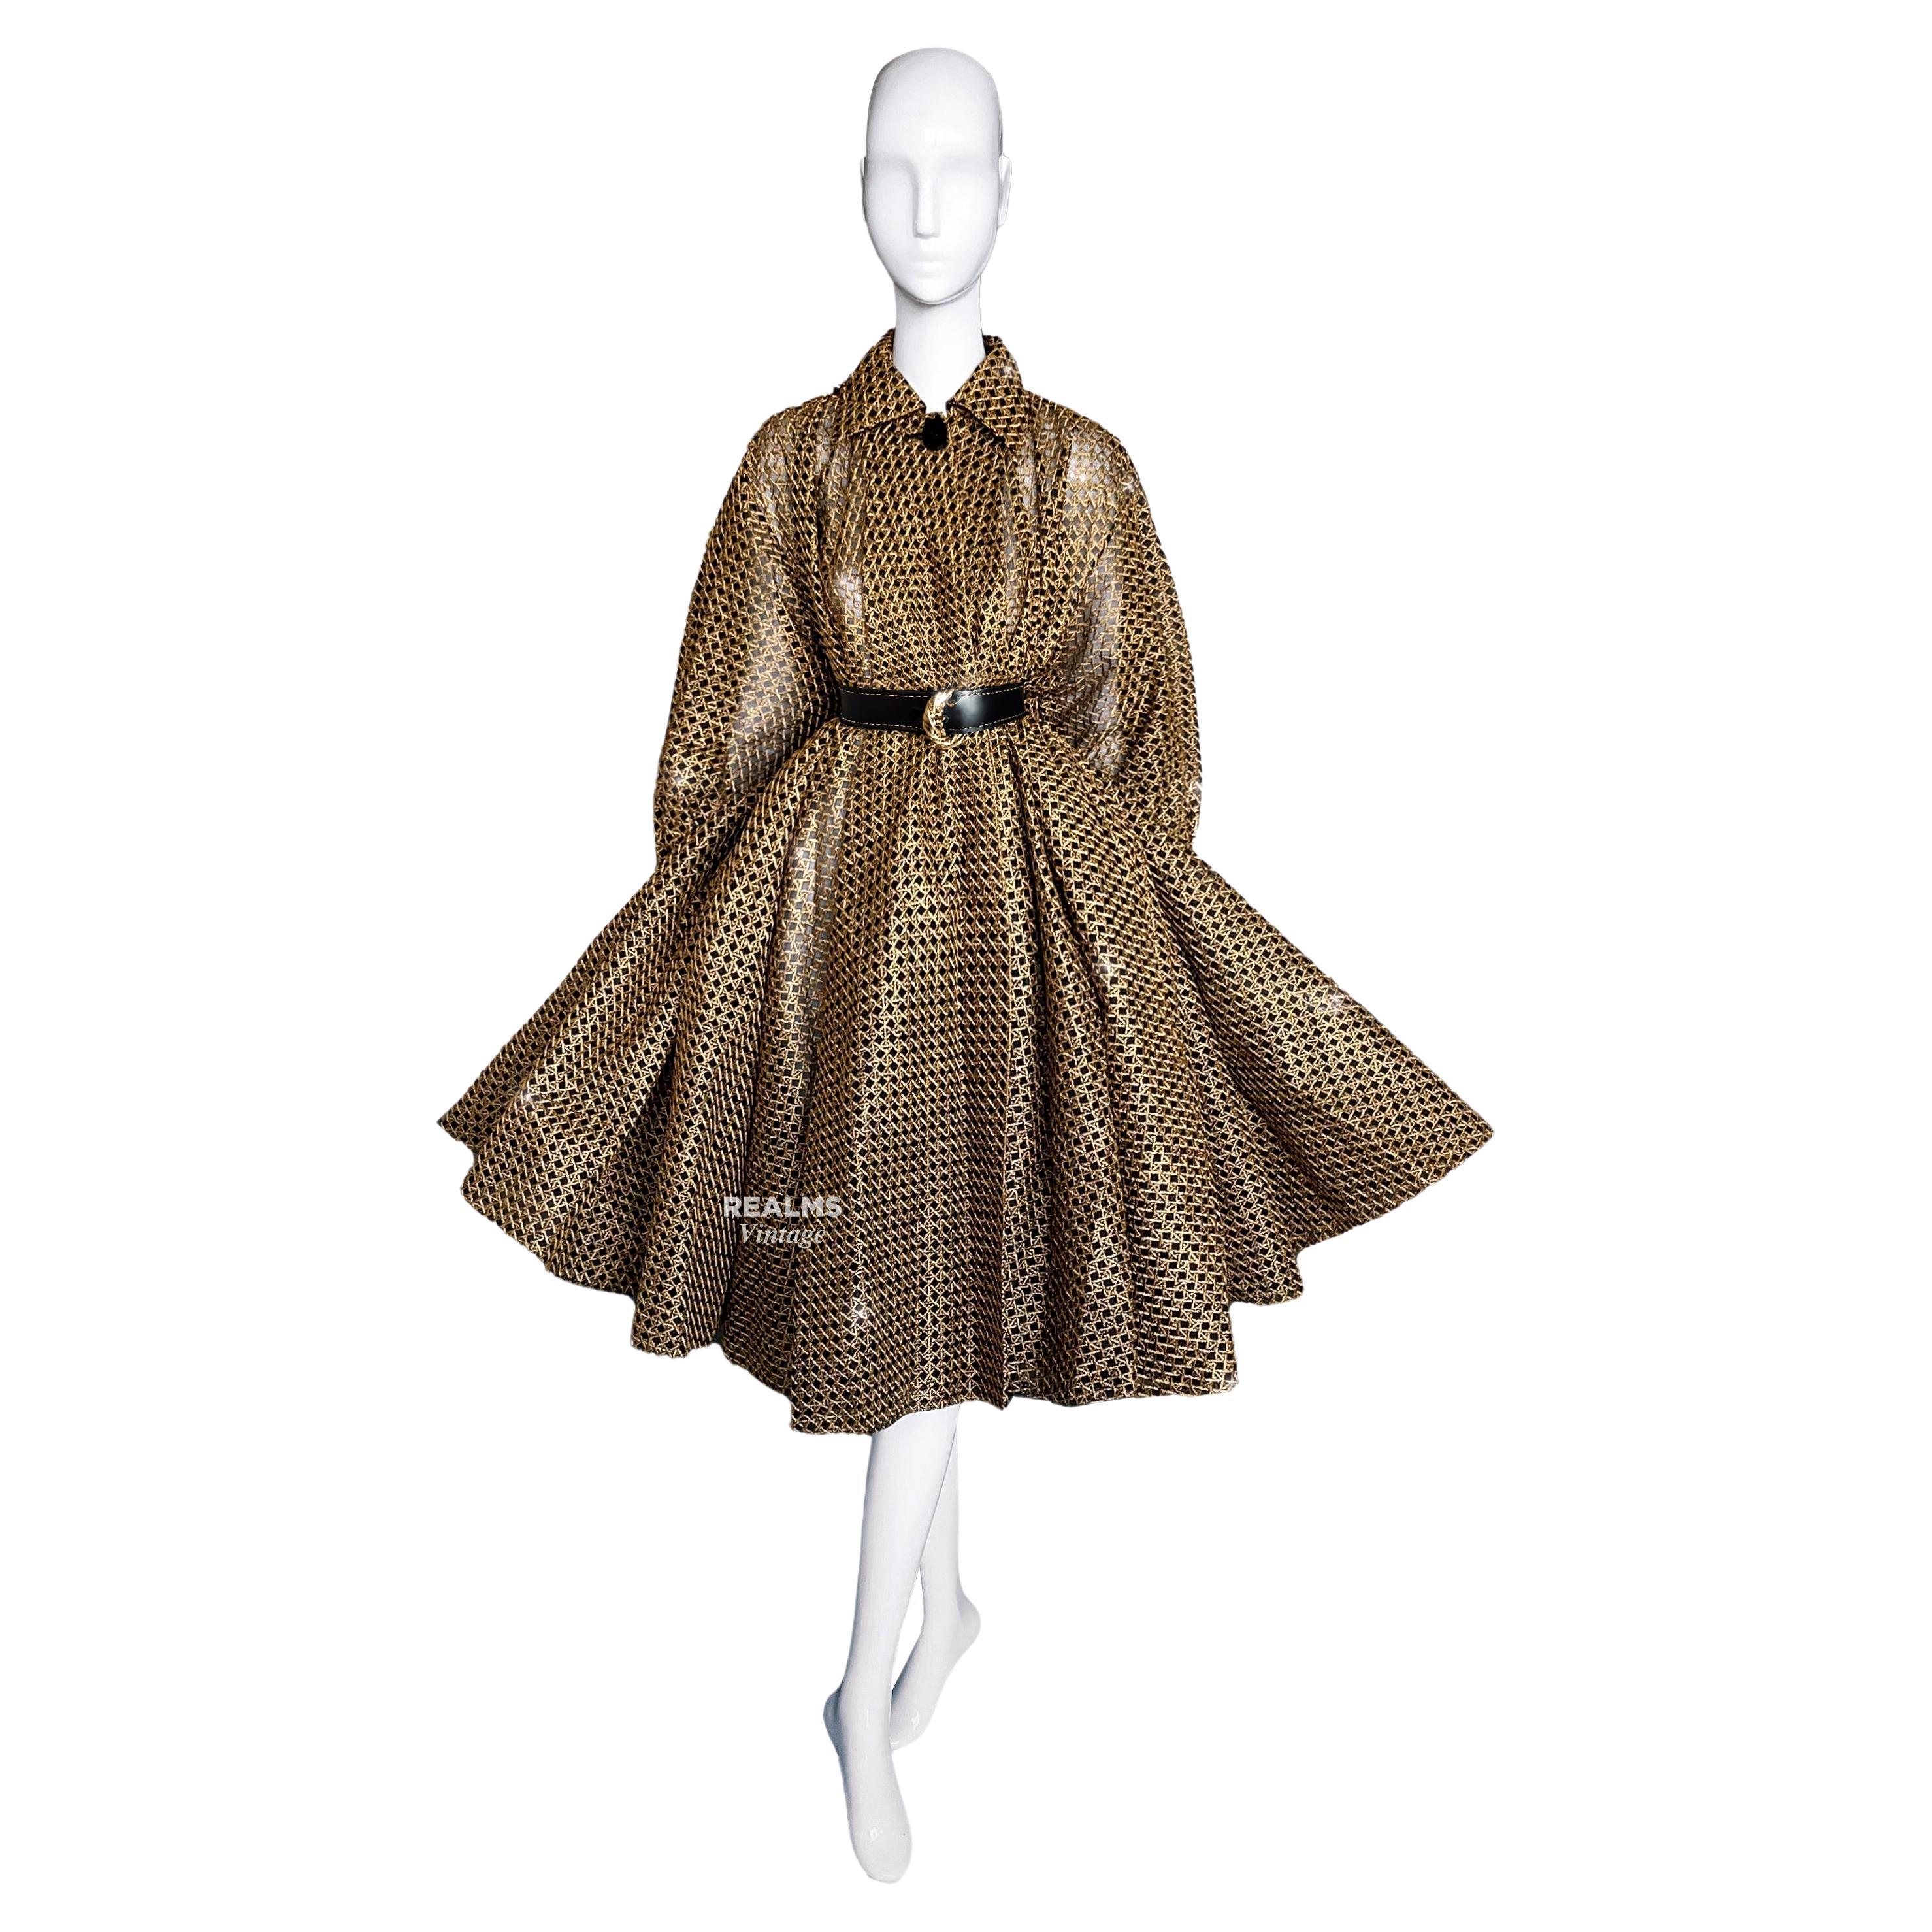 CHRISTIAN DIOR Archival SS 1991 - Spectaculaire robe manteau swing overcoat  en vente